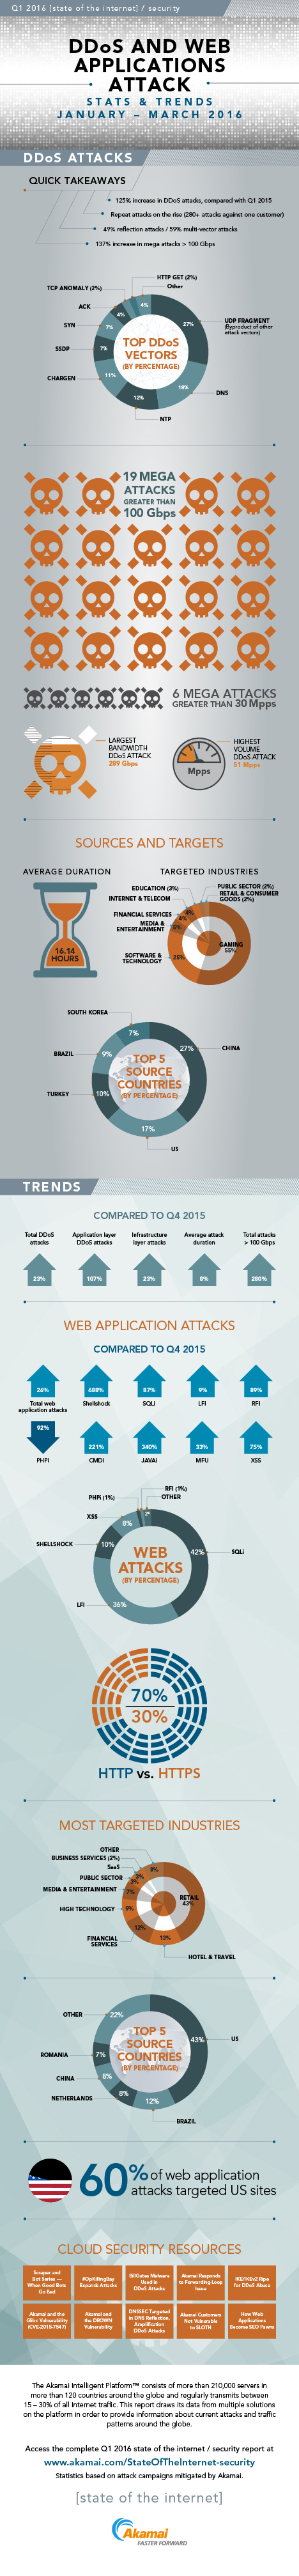 See the most important cloud security trends and stats from the State of the Internet / Security report for Q2 2015.